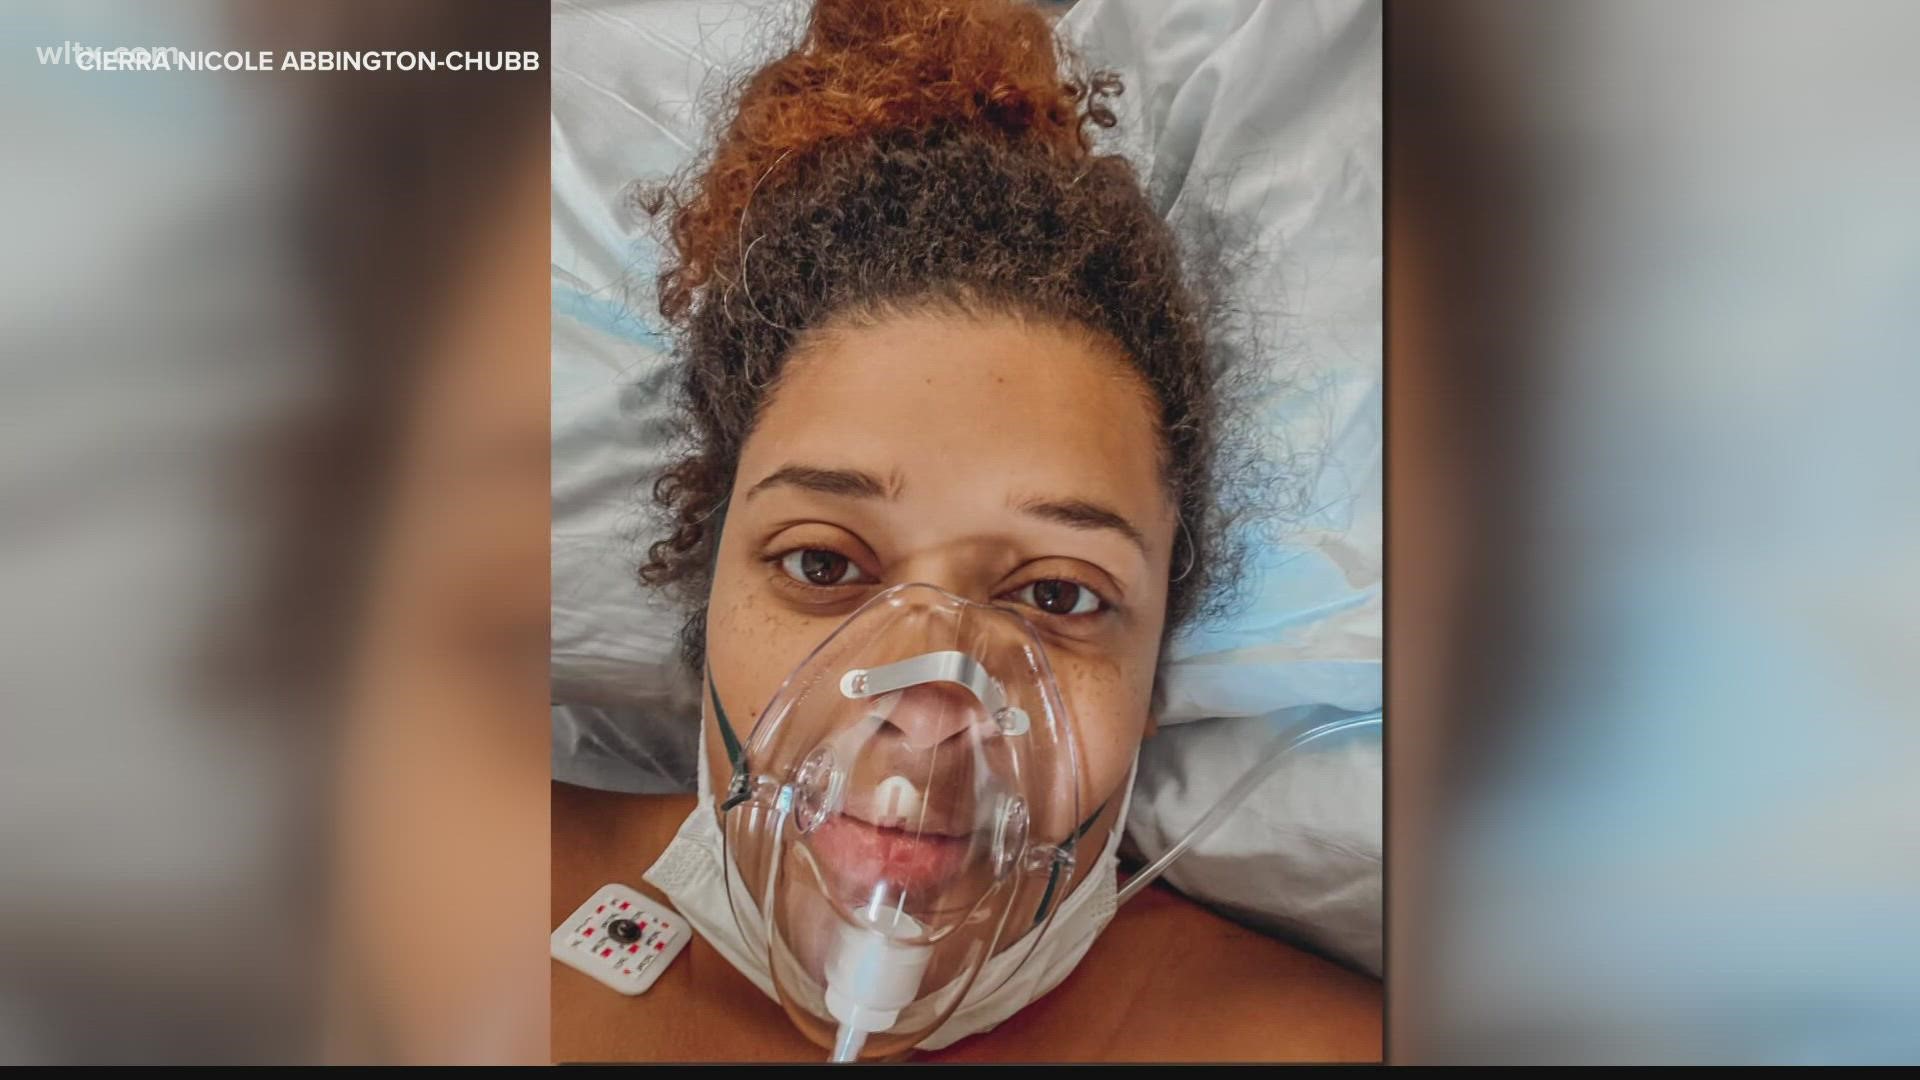 A South Carolina woman continues to fight for her life. Cierra Chubb contracted COVID-19 while pregnant with her third child and is now on a ventilator.